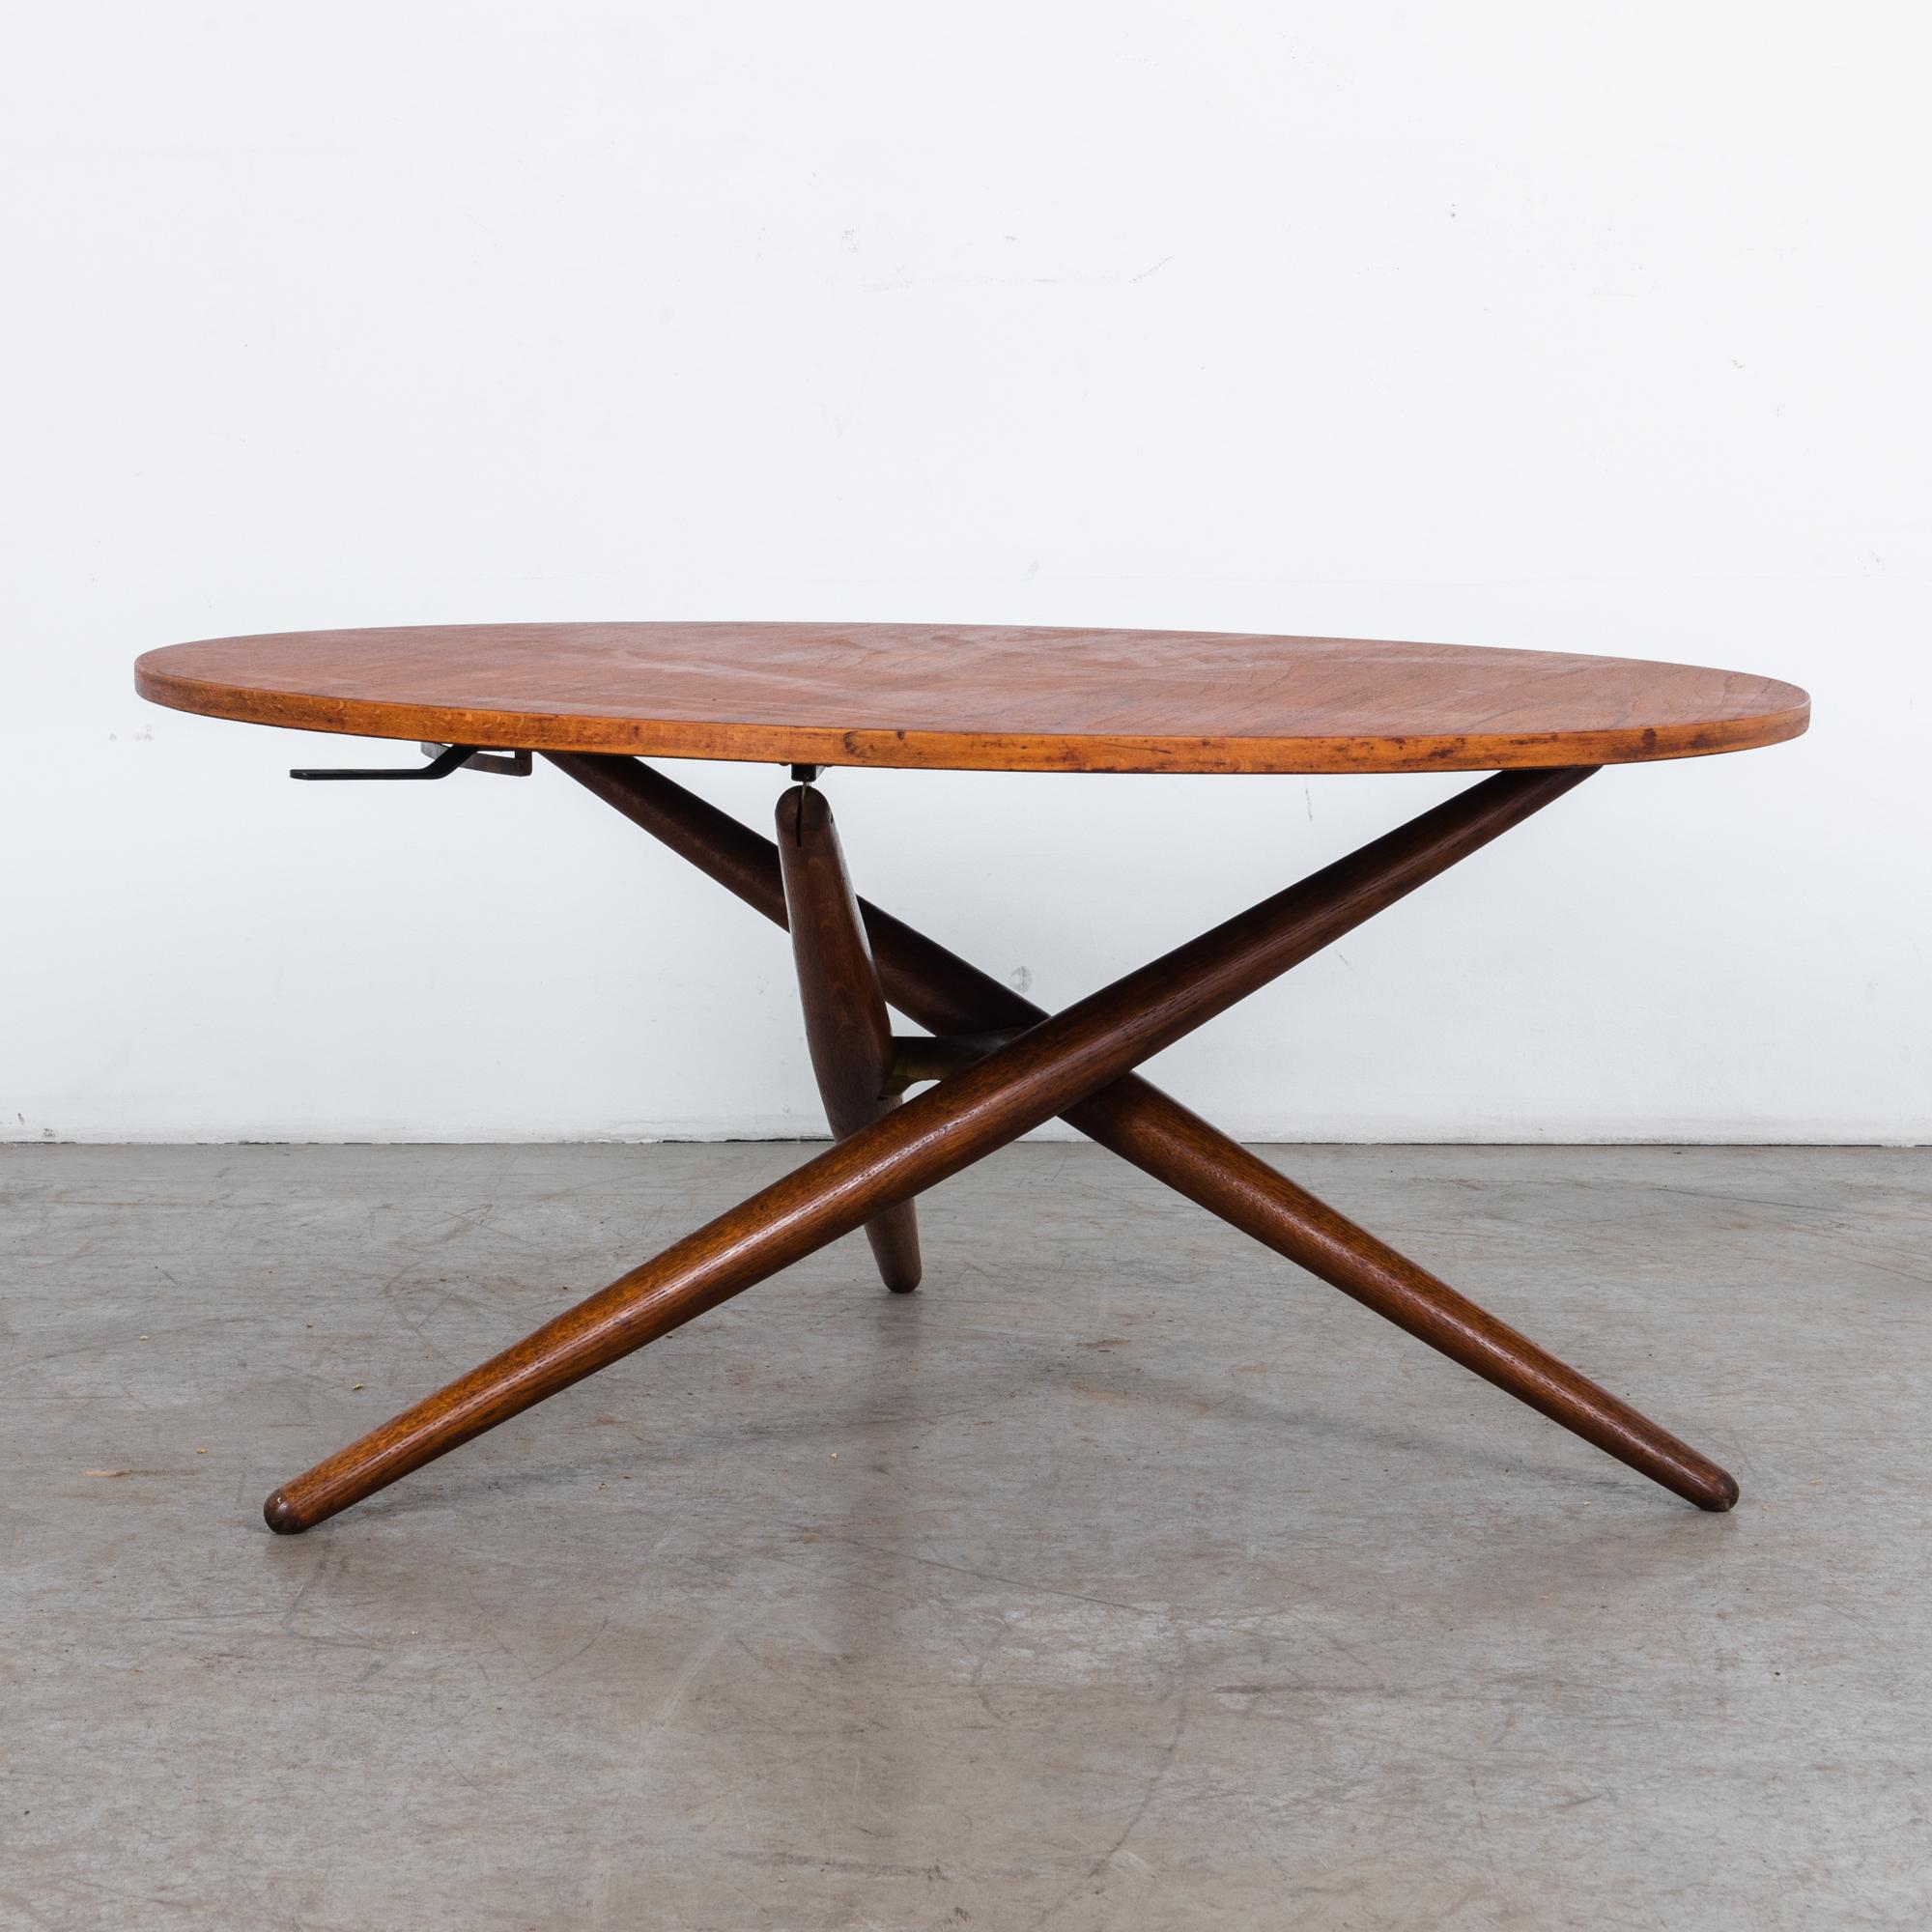 Round adjustable oak wood table with veneered top, by designer Jurg Bally, circa 1960. This acclaimed design features a unique height adjustment mechanism, which while providing an important function is a beautiful detail in itself. This rare